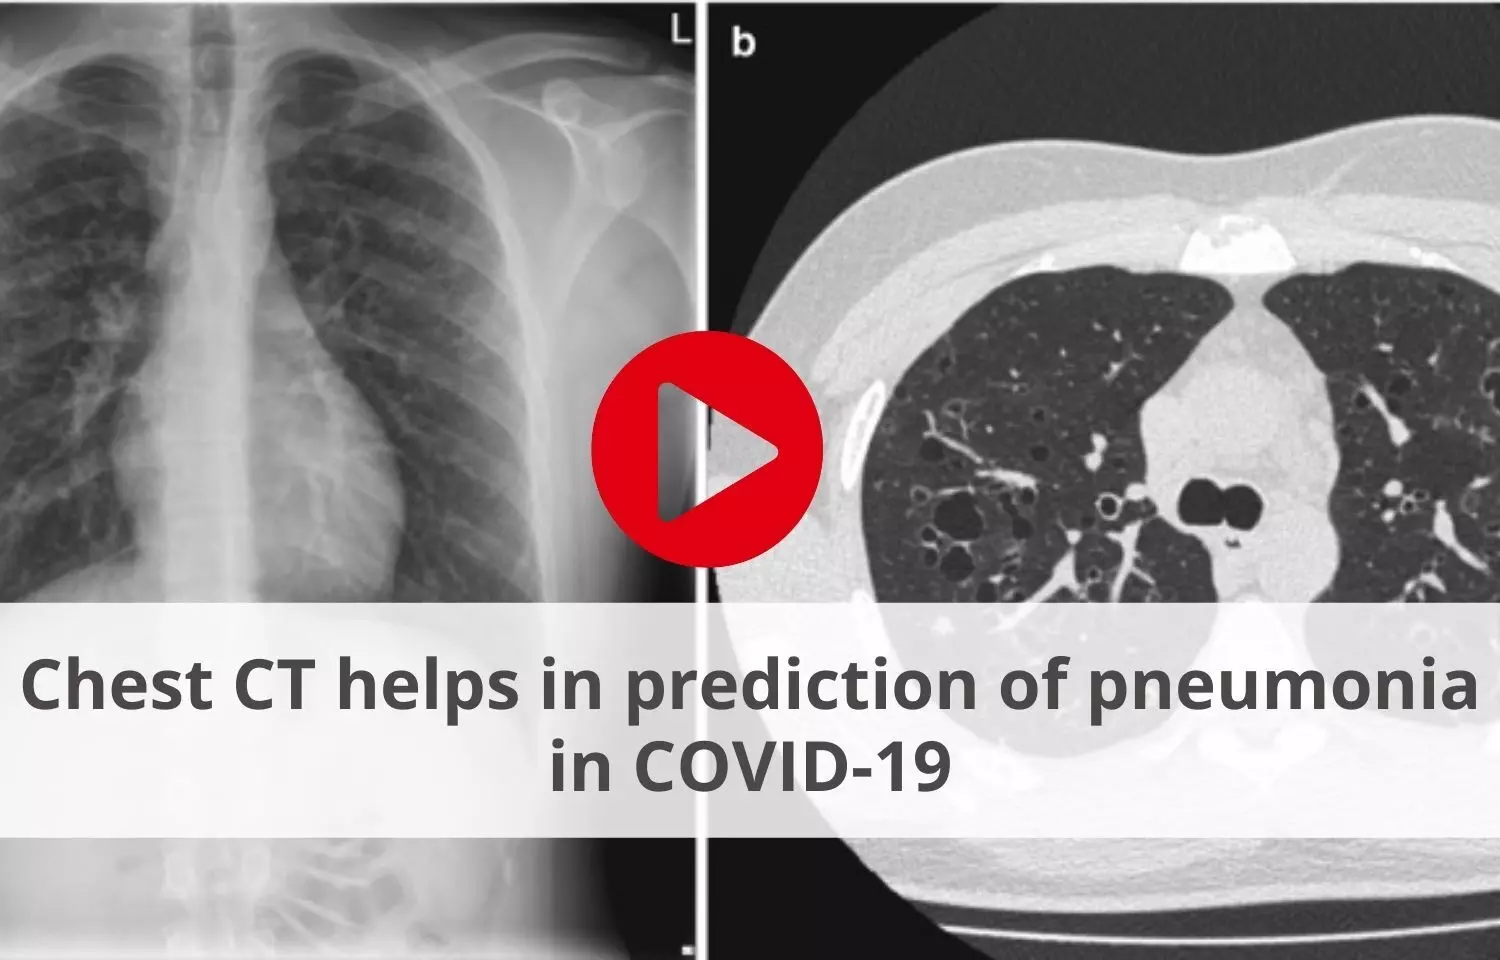 Chest CT helps in prediction of pneumonia in COVID-19